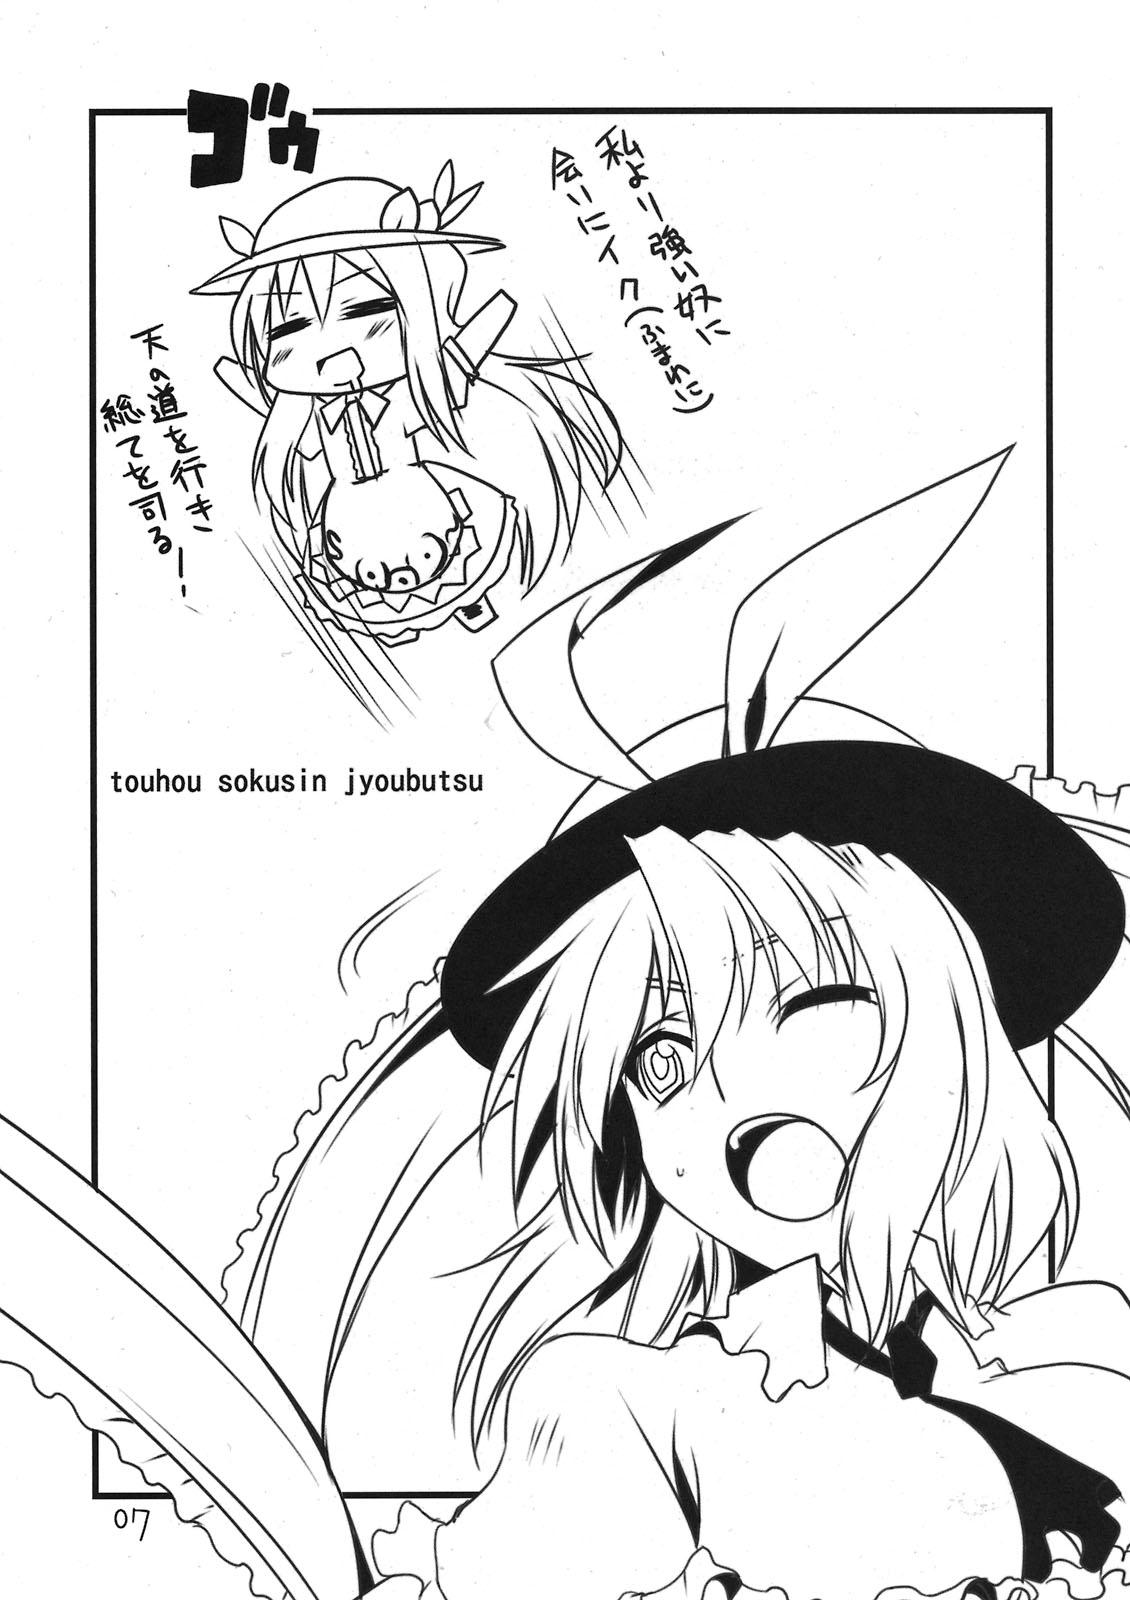 Foot Fetish Touhou Sox In Joubutsu - Touhou project Chacal - Page 7